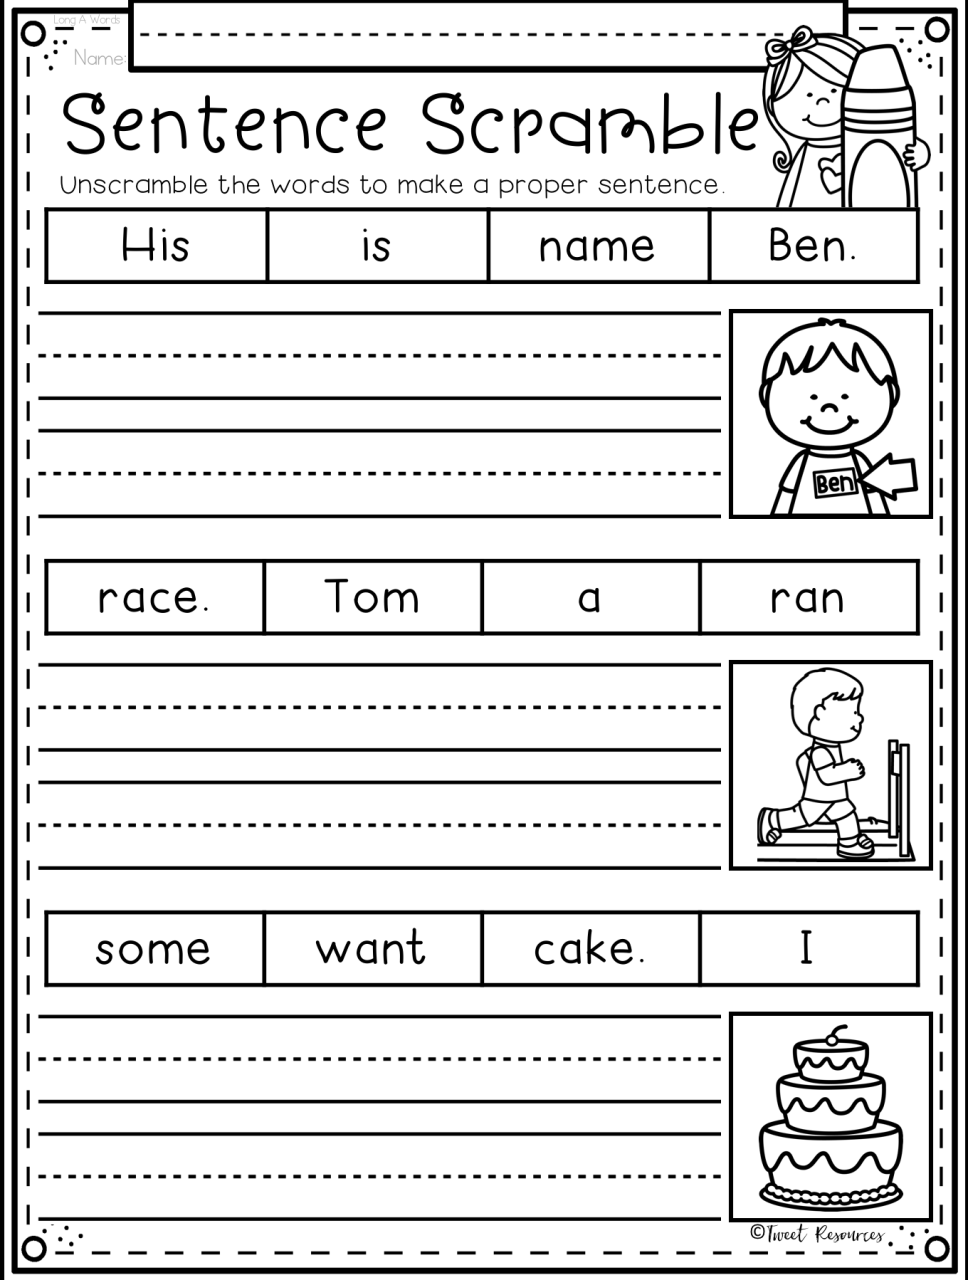 English Writing Practice Worksheets For Grade 1